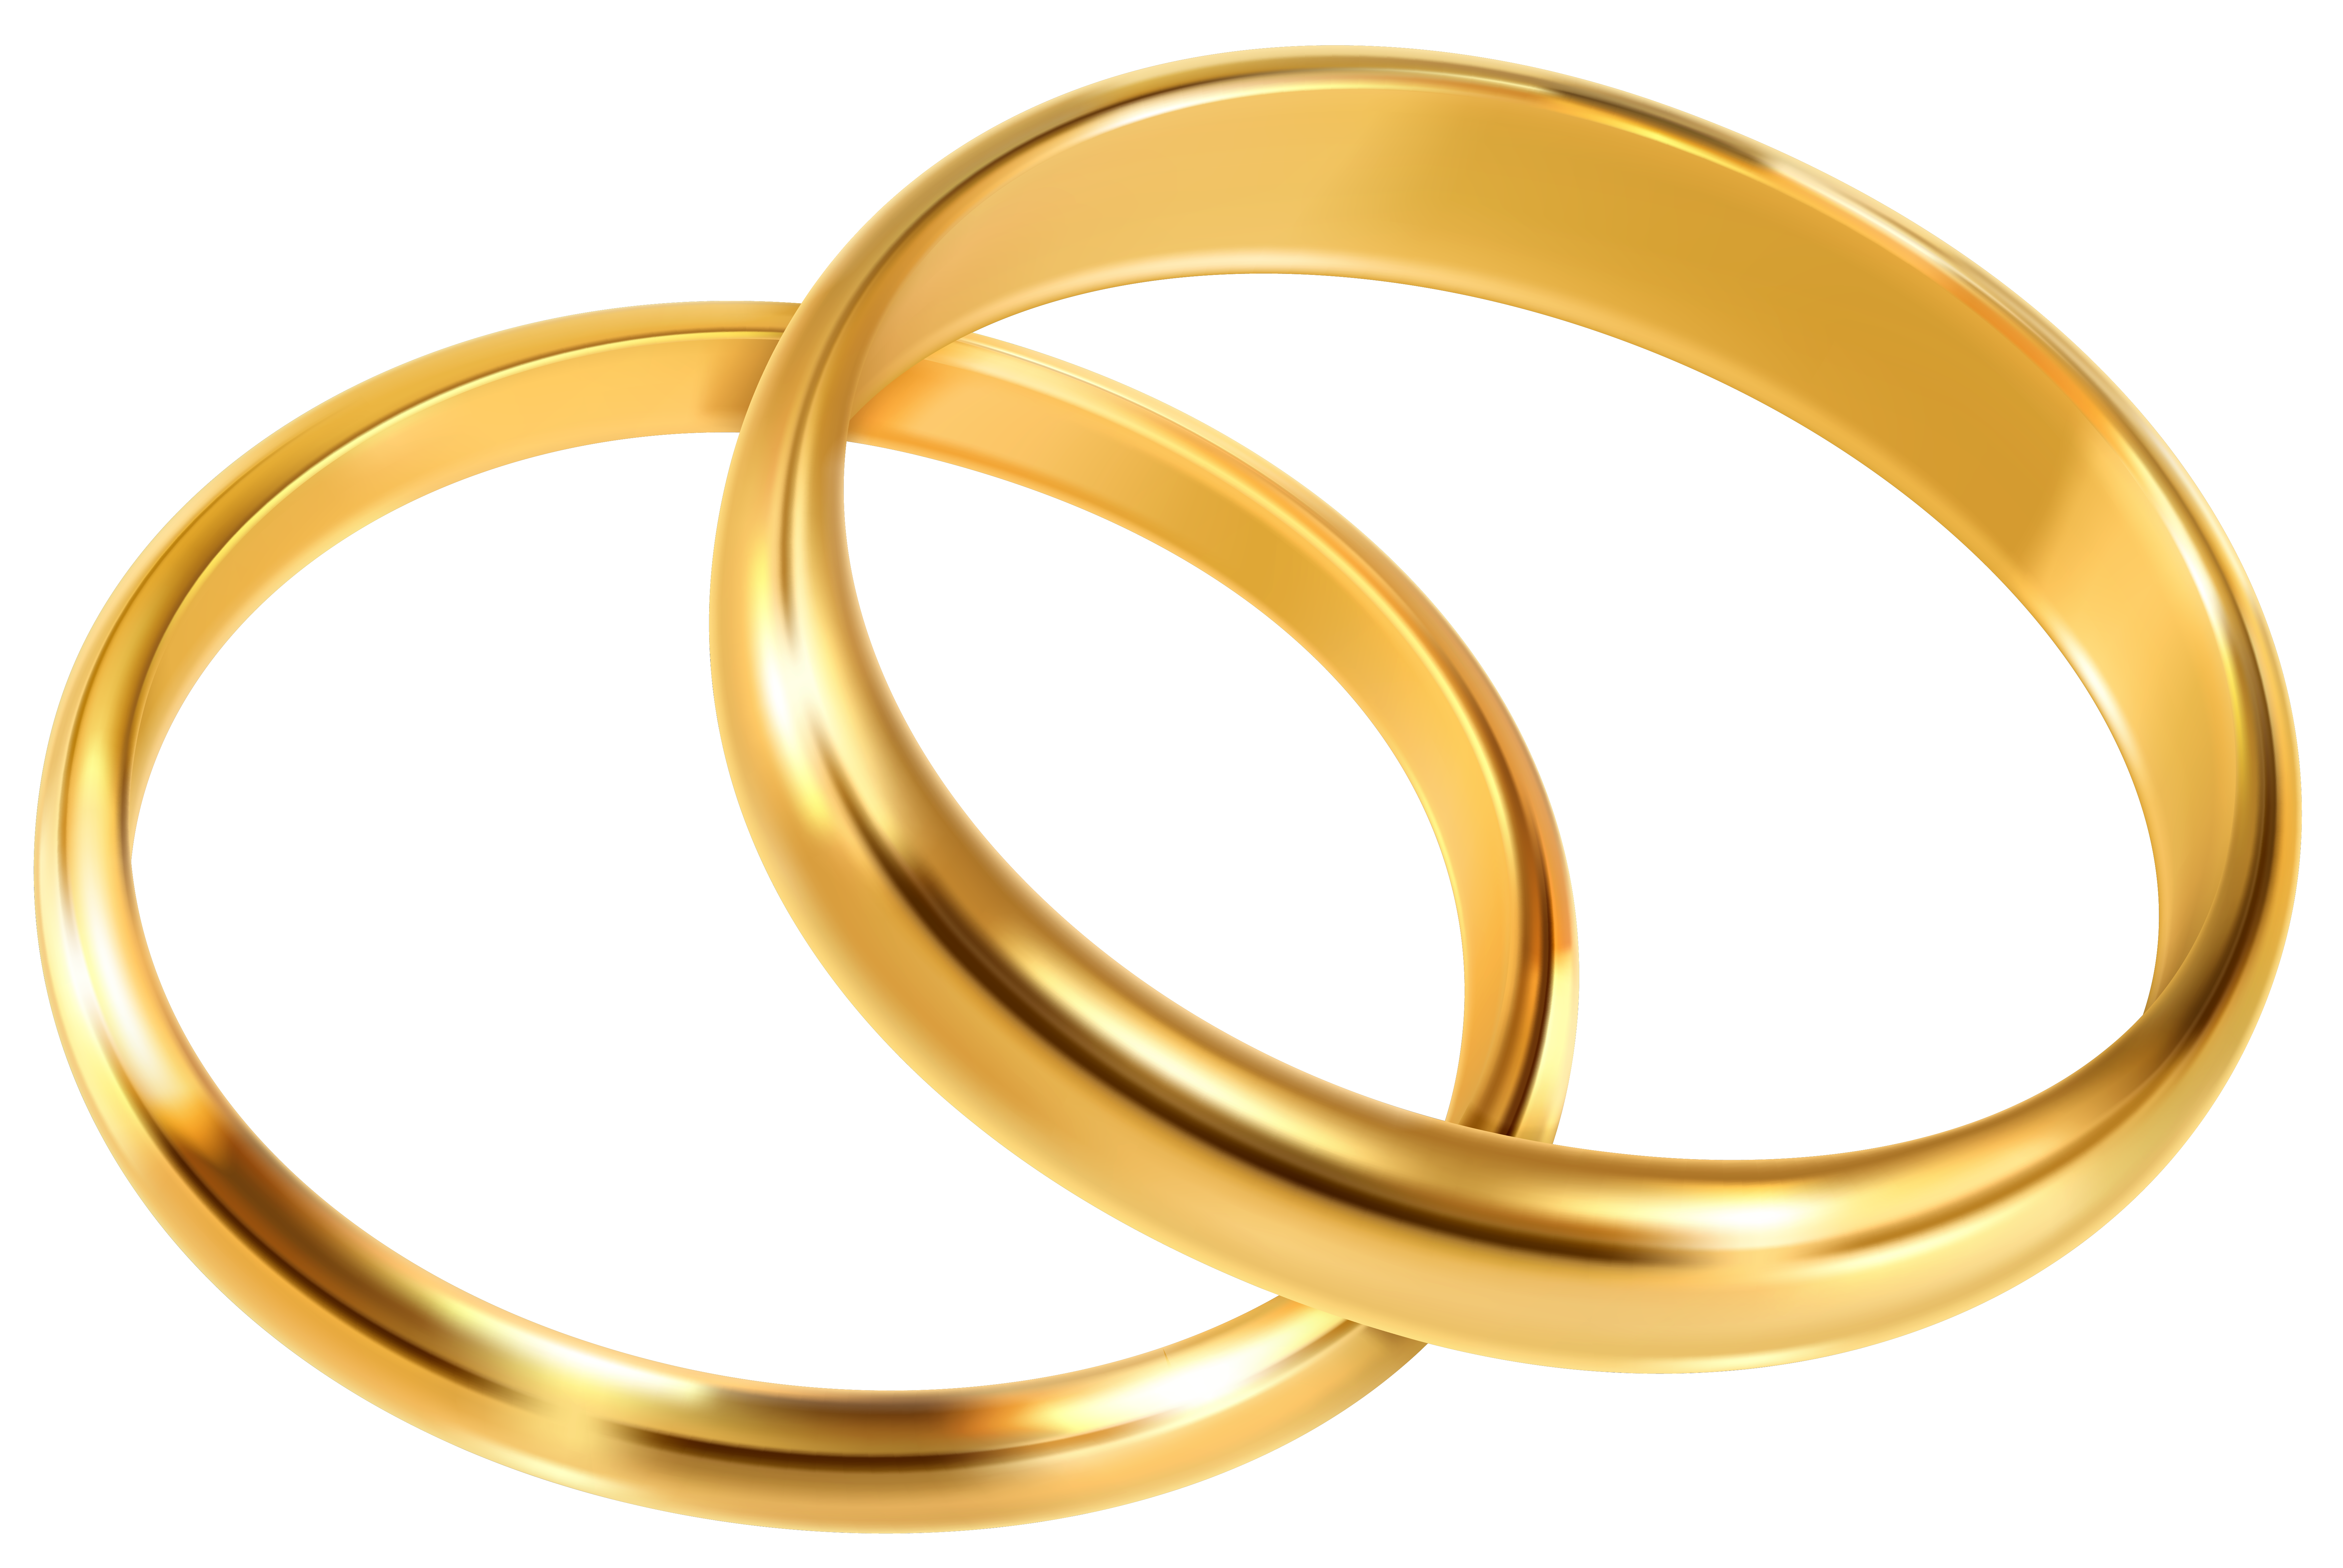 Wedding ring clipart png